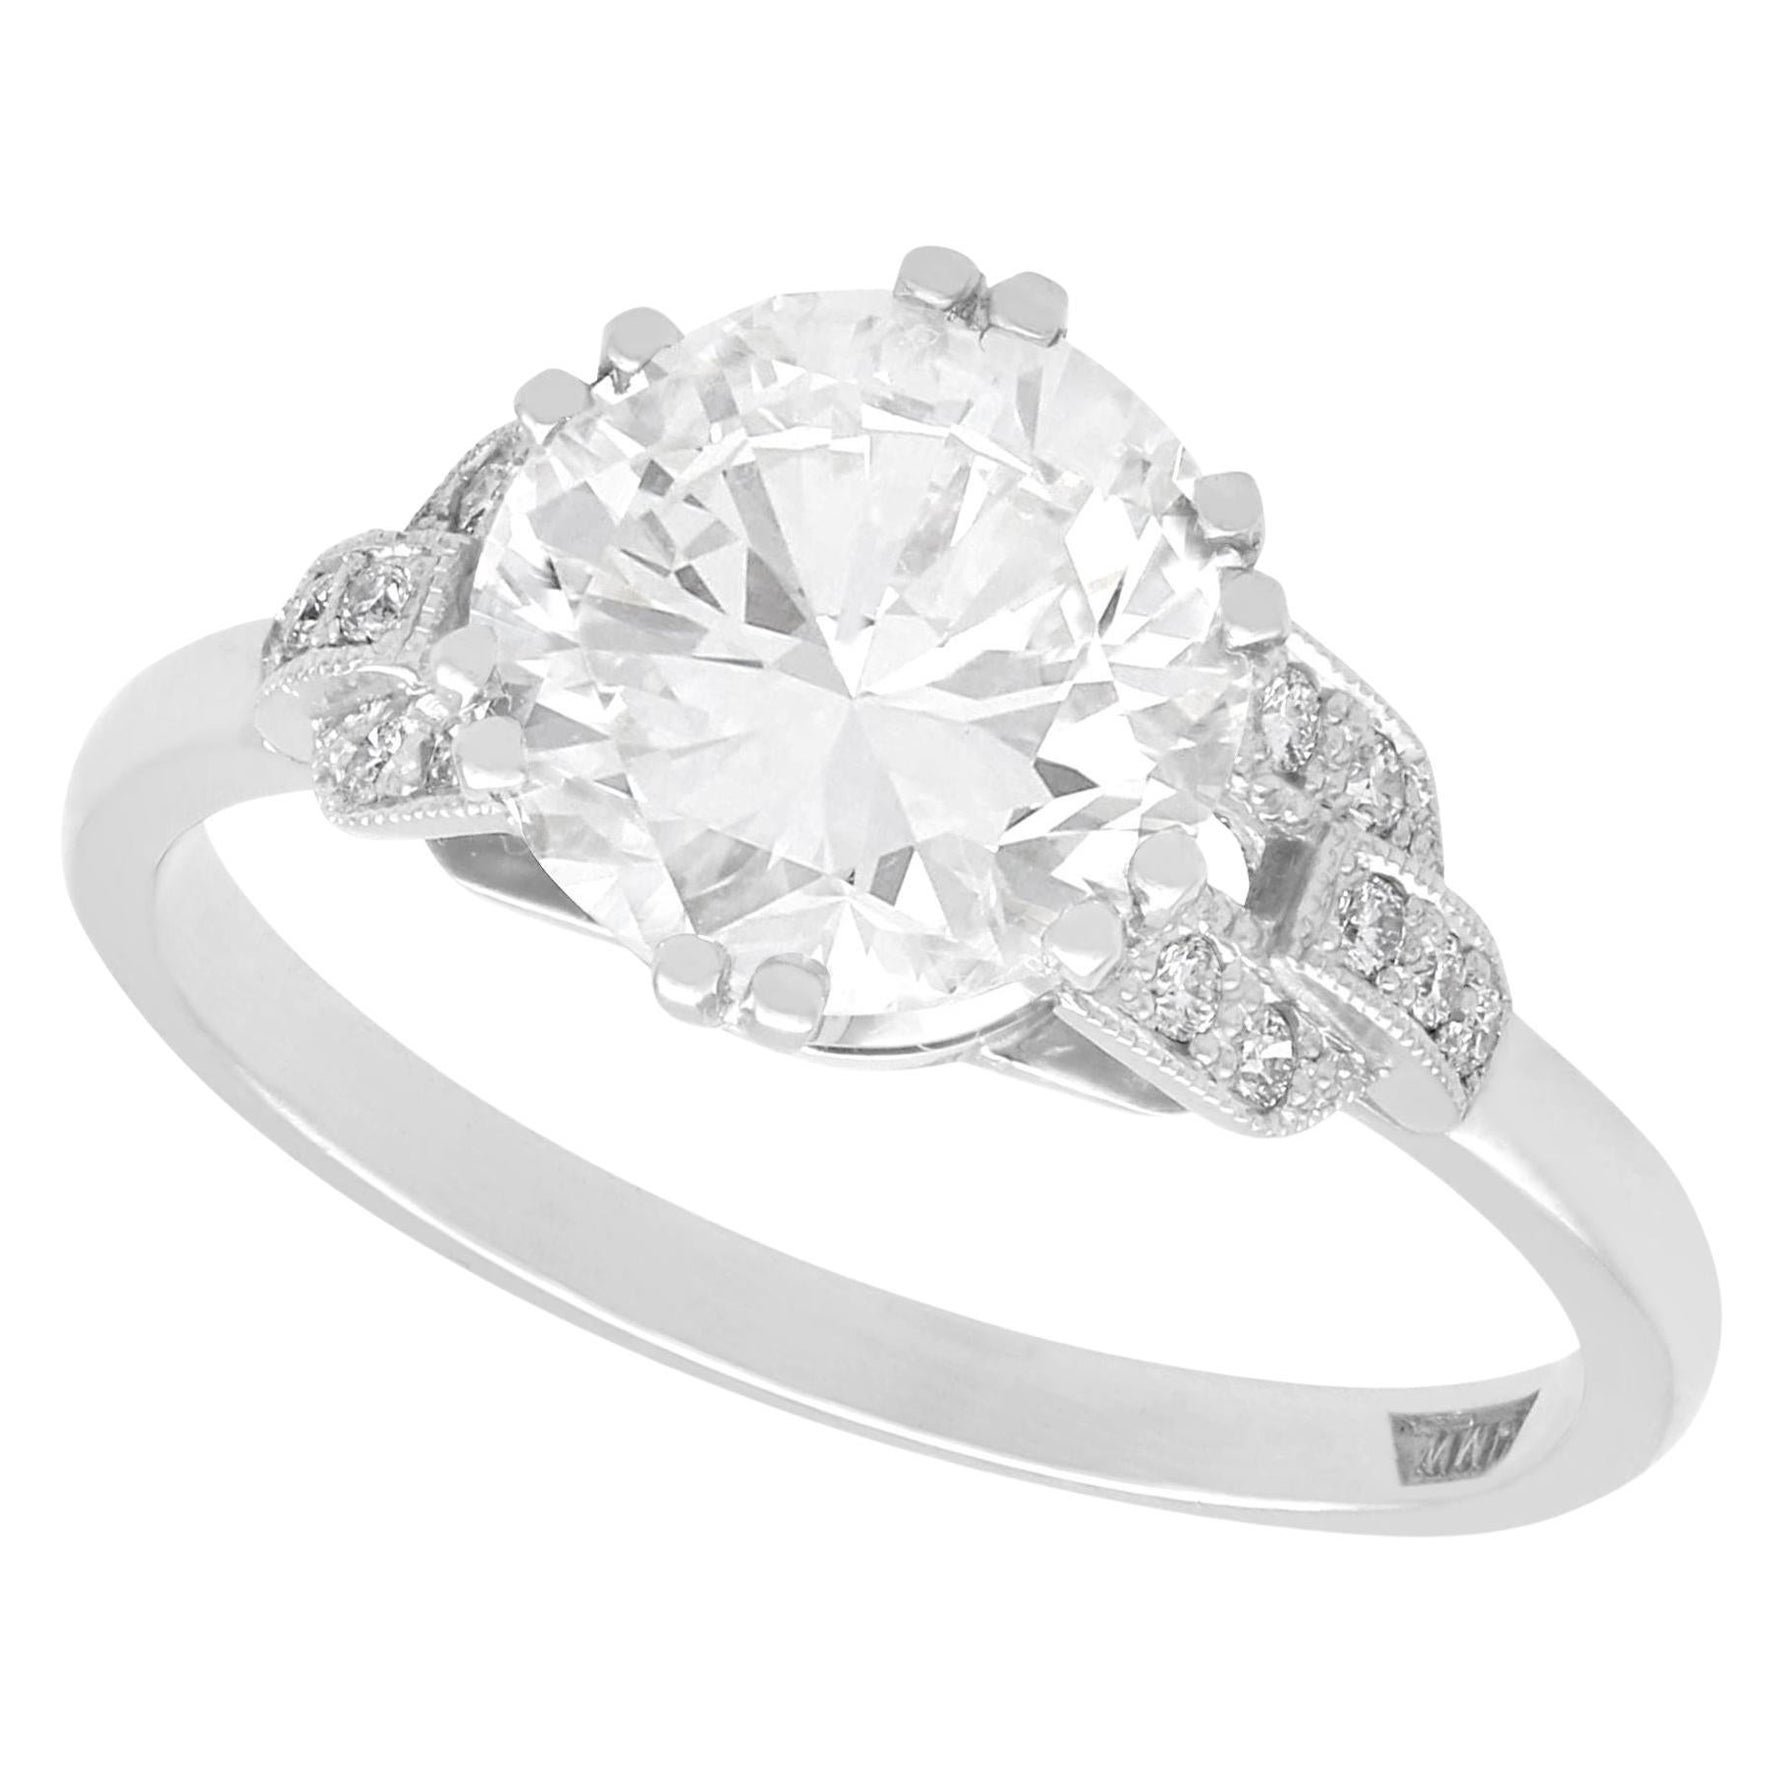 2.39 Carat Diamond and Platinum Solitaire Engagement Ring For Sale